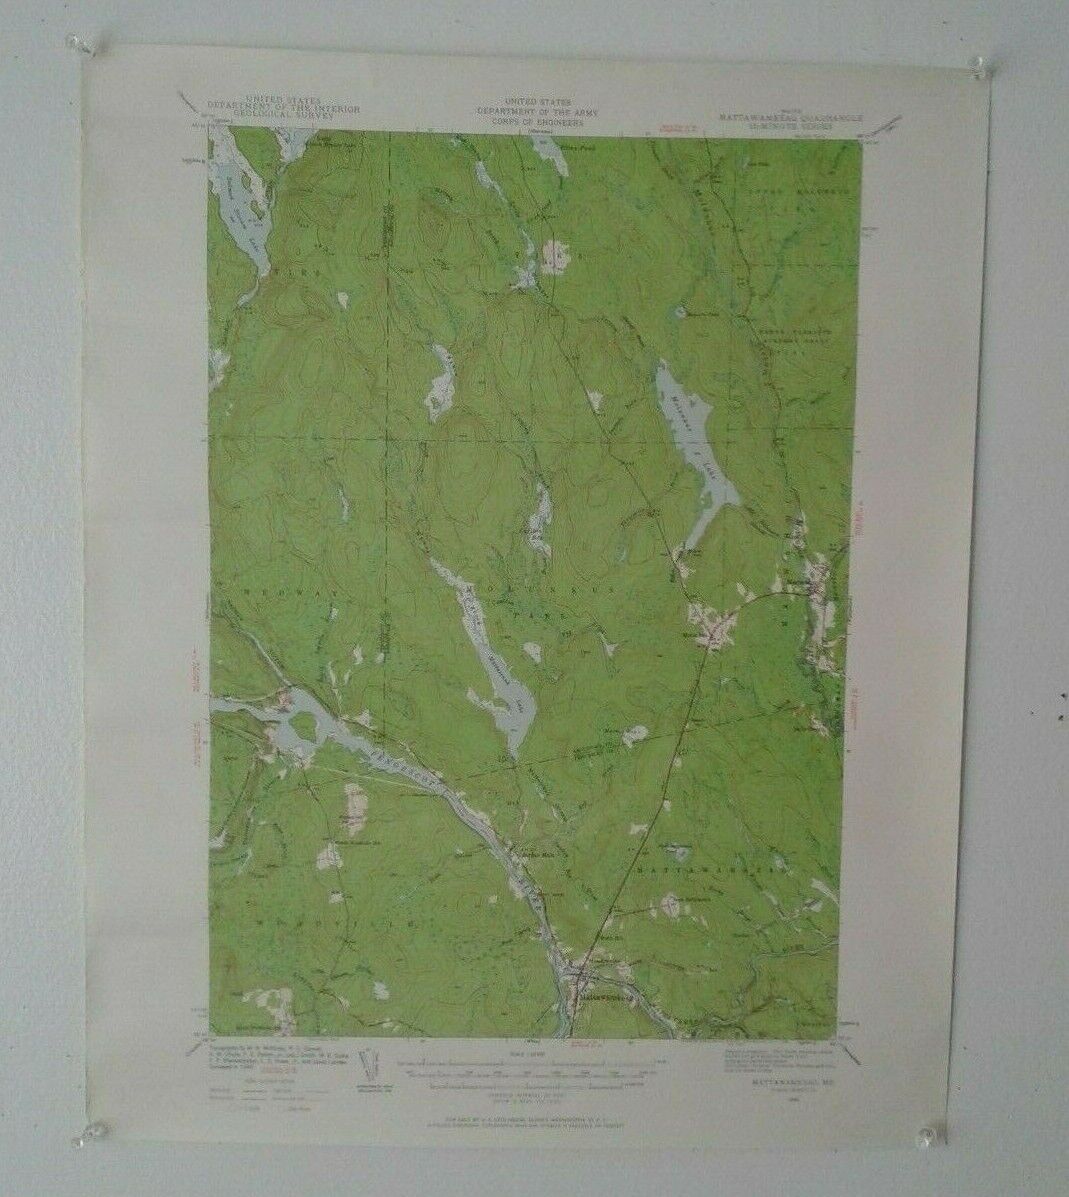 TOPOGRAPHICAL MAPS Lot of 12 Vintage Maps 1940/50s, NY.,Pa., N.J. and Maine Без бренда